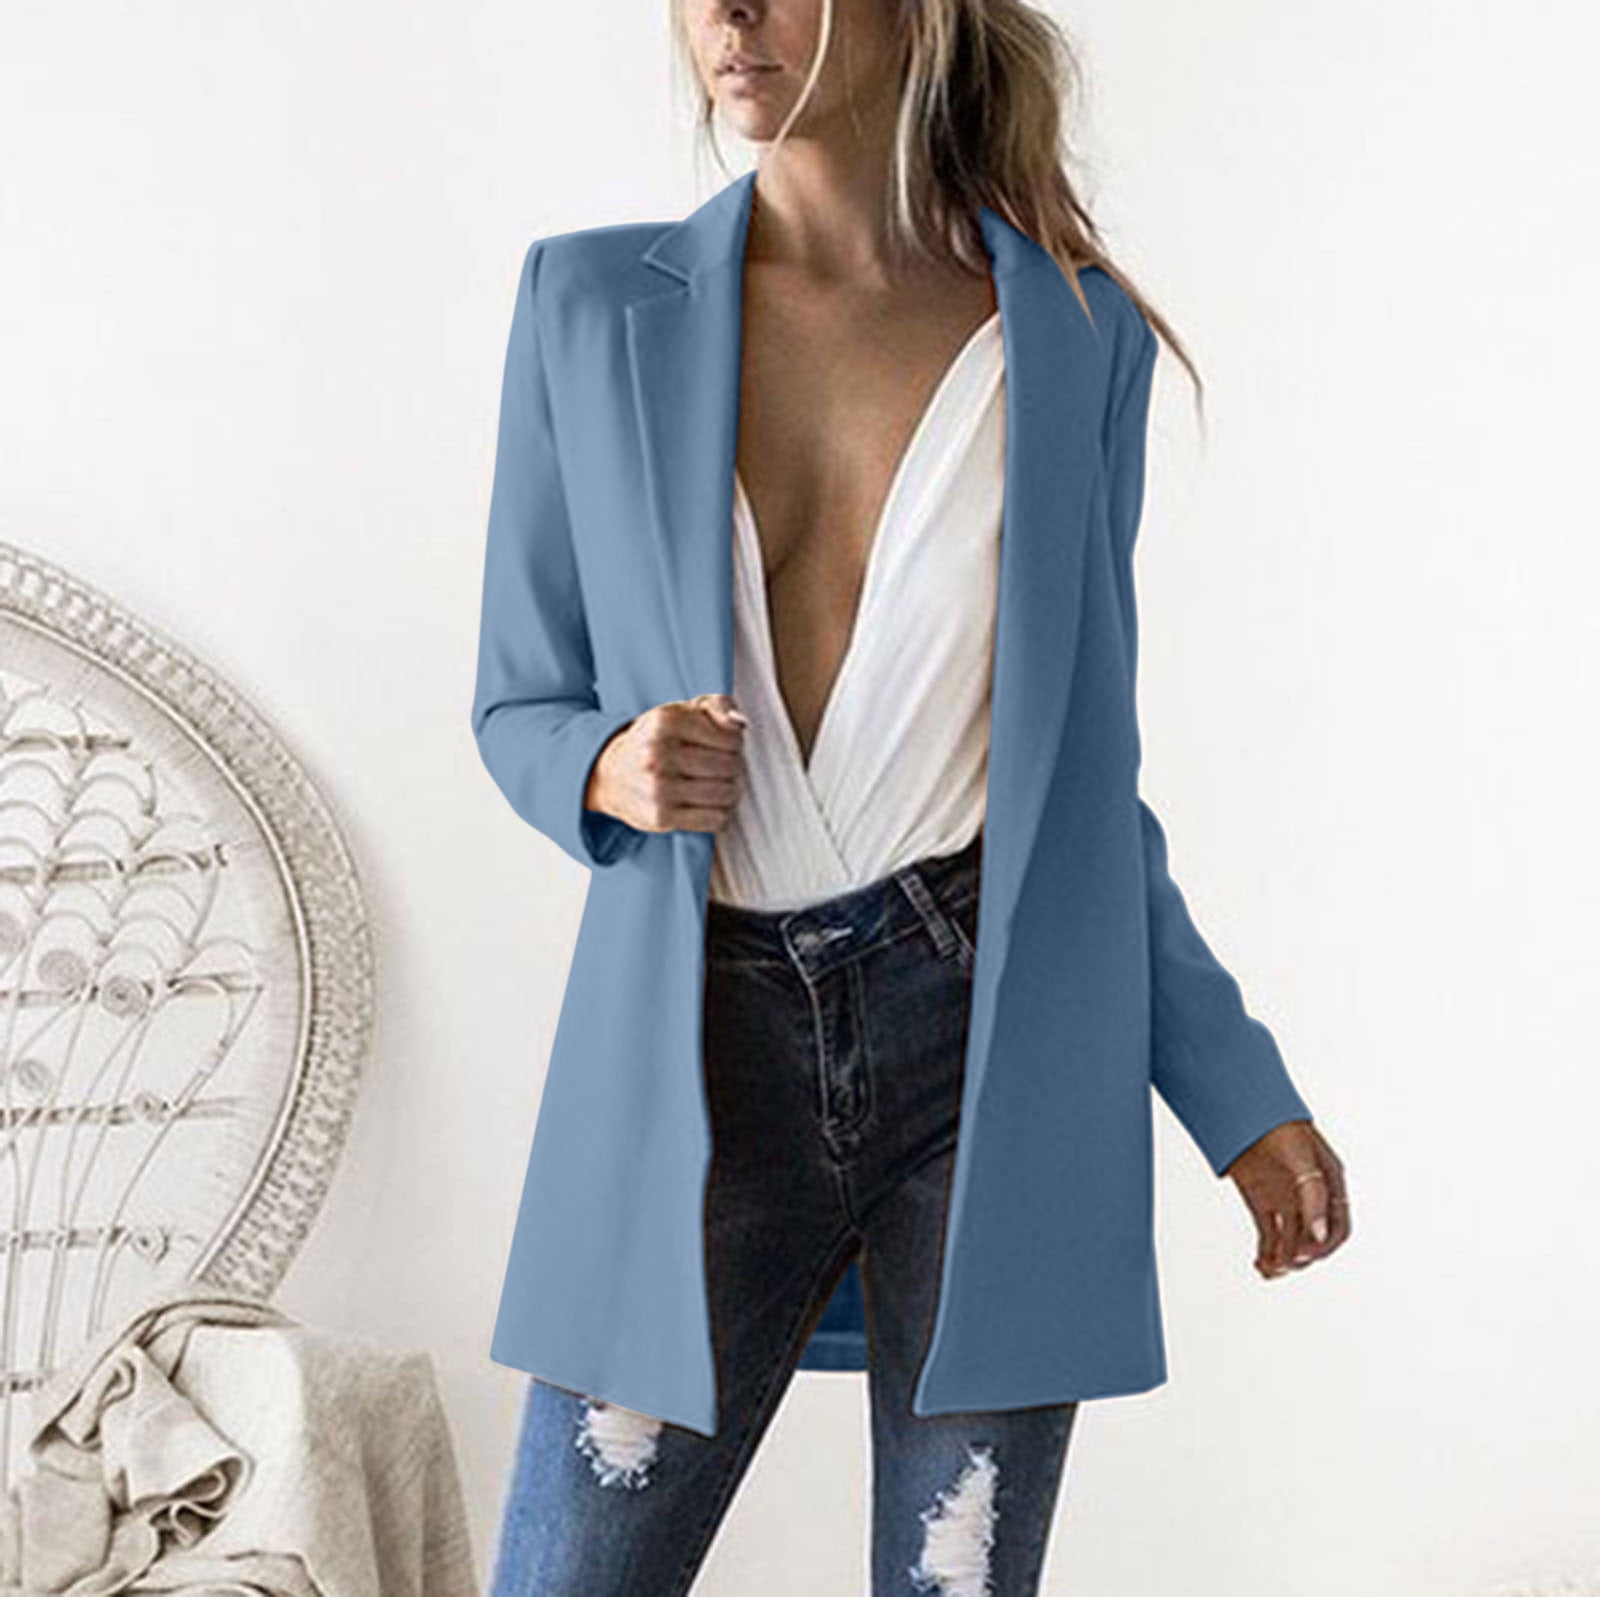 Jacenvly Business Attire Women Clearance Turndown Collar Long Sleeve Short  Blazers for Women Solid Cardigan Coat Soft Skin-Friendly Casual Refined